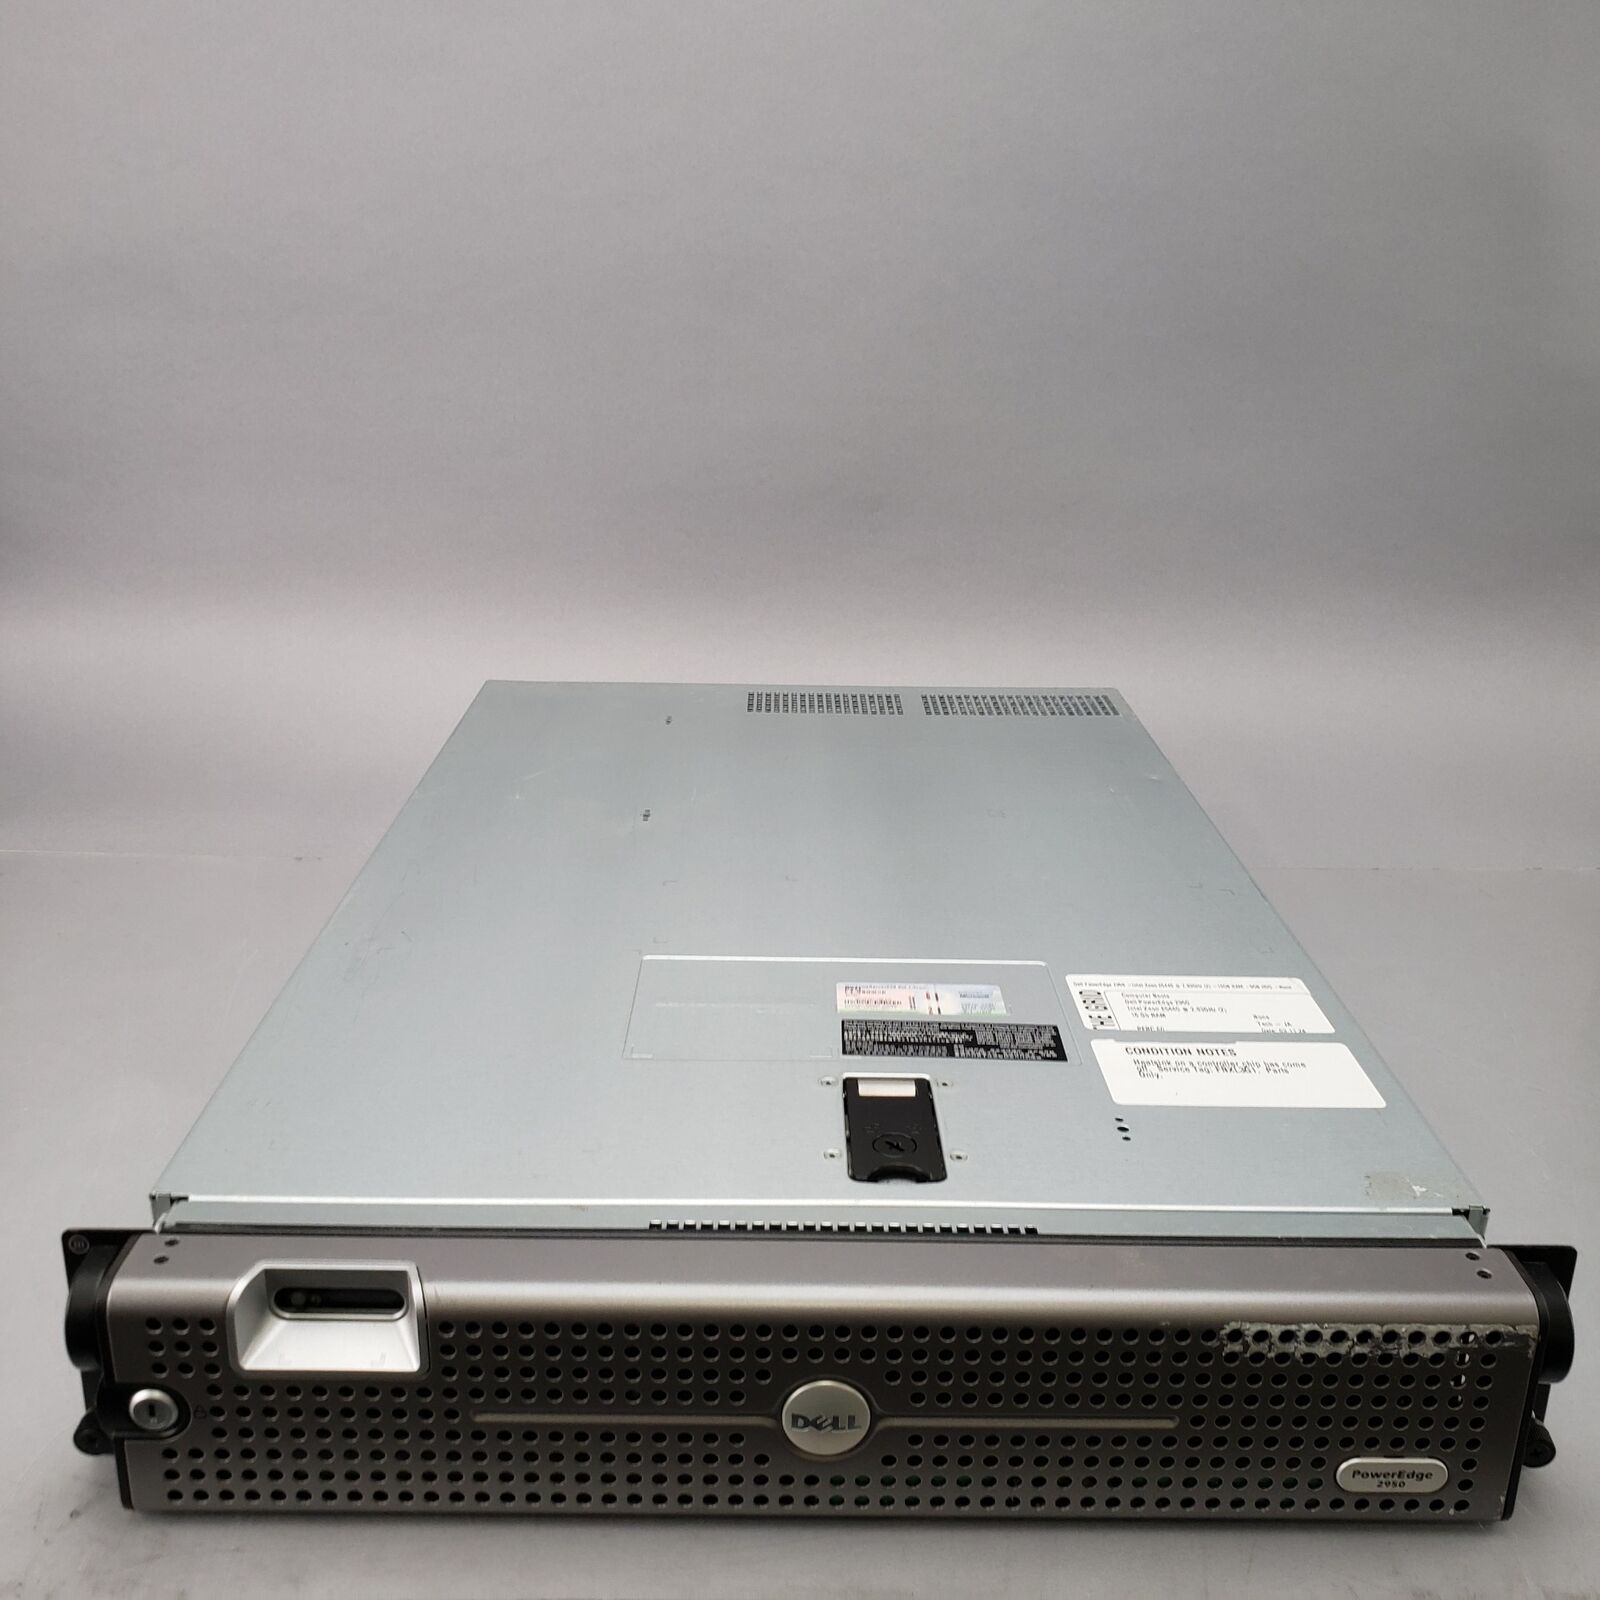 Dell PowerEdge 2950 Server Intel Xeon E5440 2.83GHz x2 16GB RAM No HDD For Parts